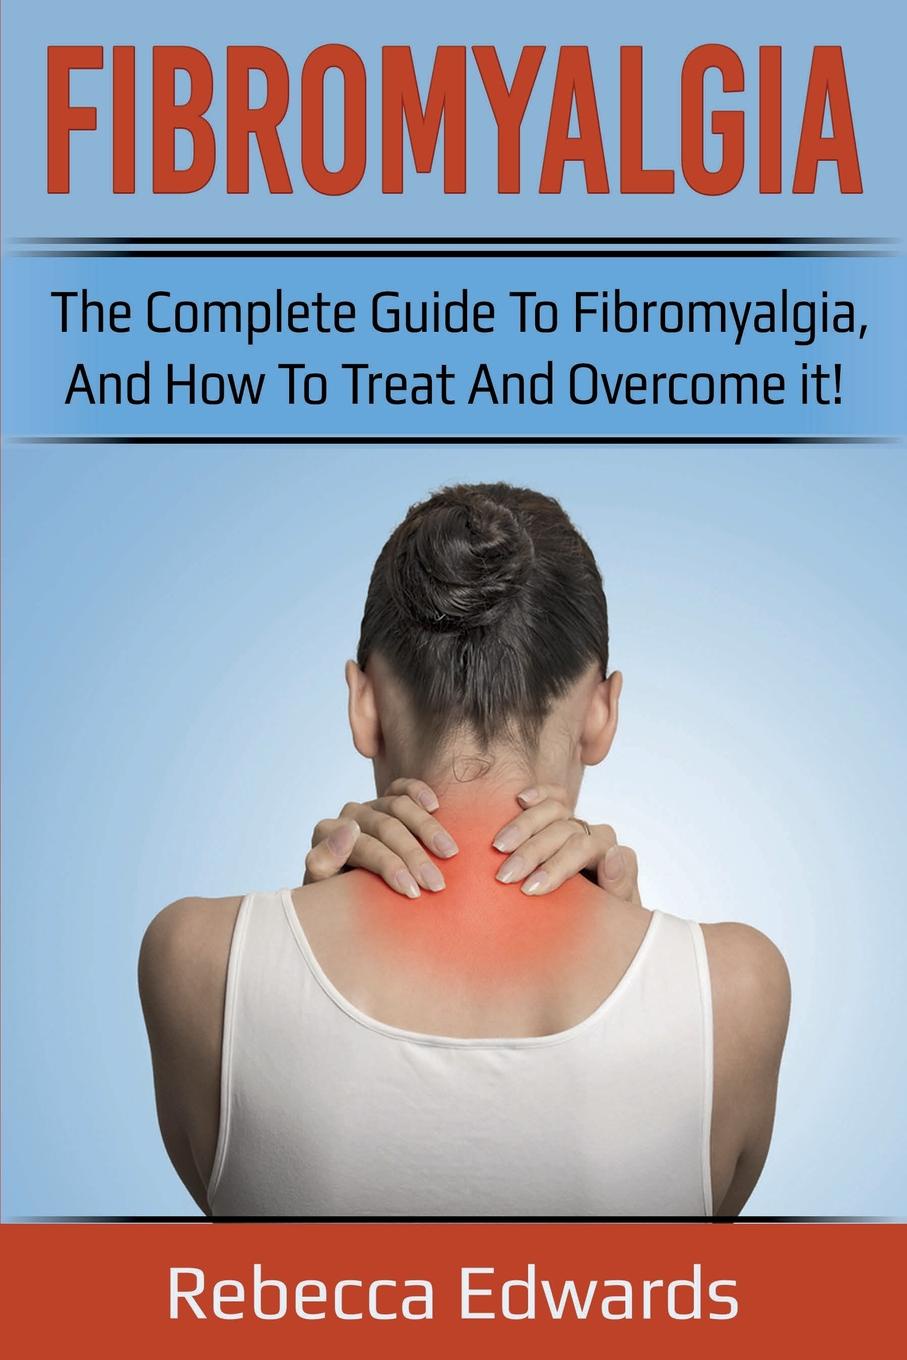 Fibromyalgia. The complete guide to Fibromyalgia, and how to treat and overcome it!